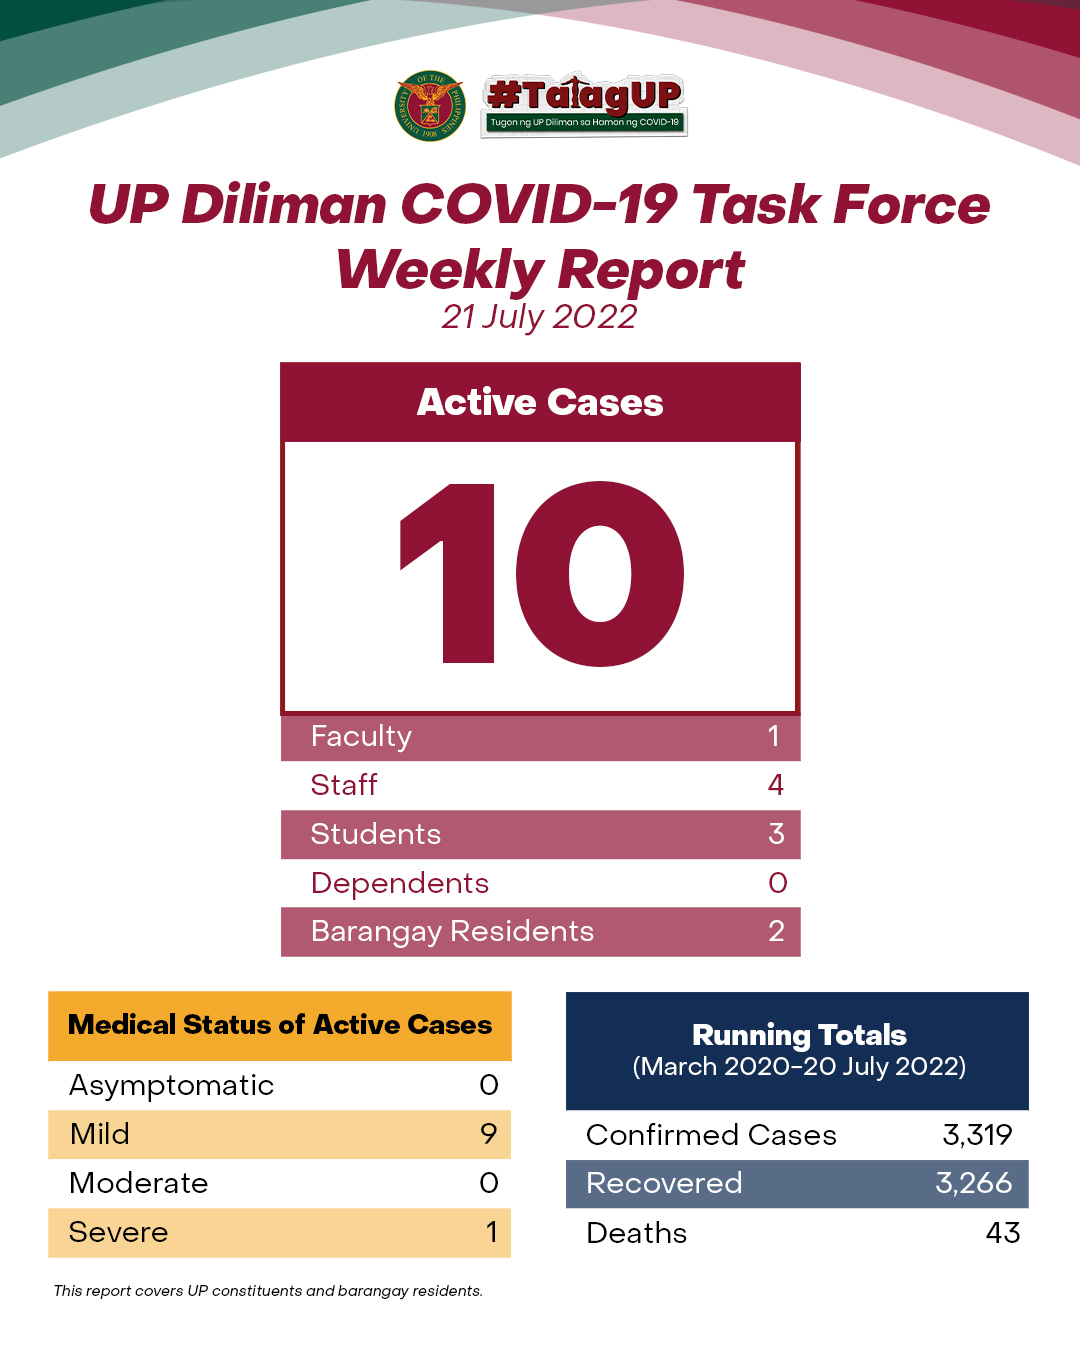 UP Diliman COVID-19 Task Force Weekly Report (21 July 2022)